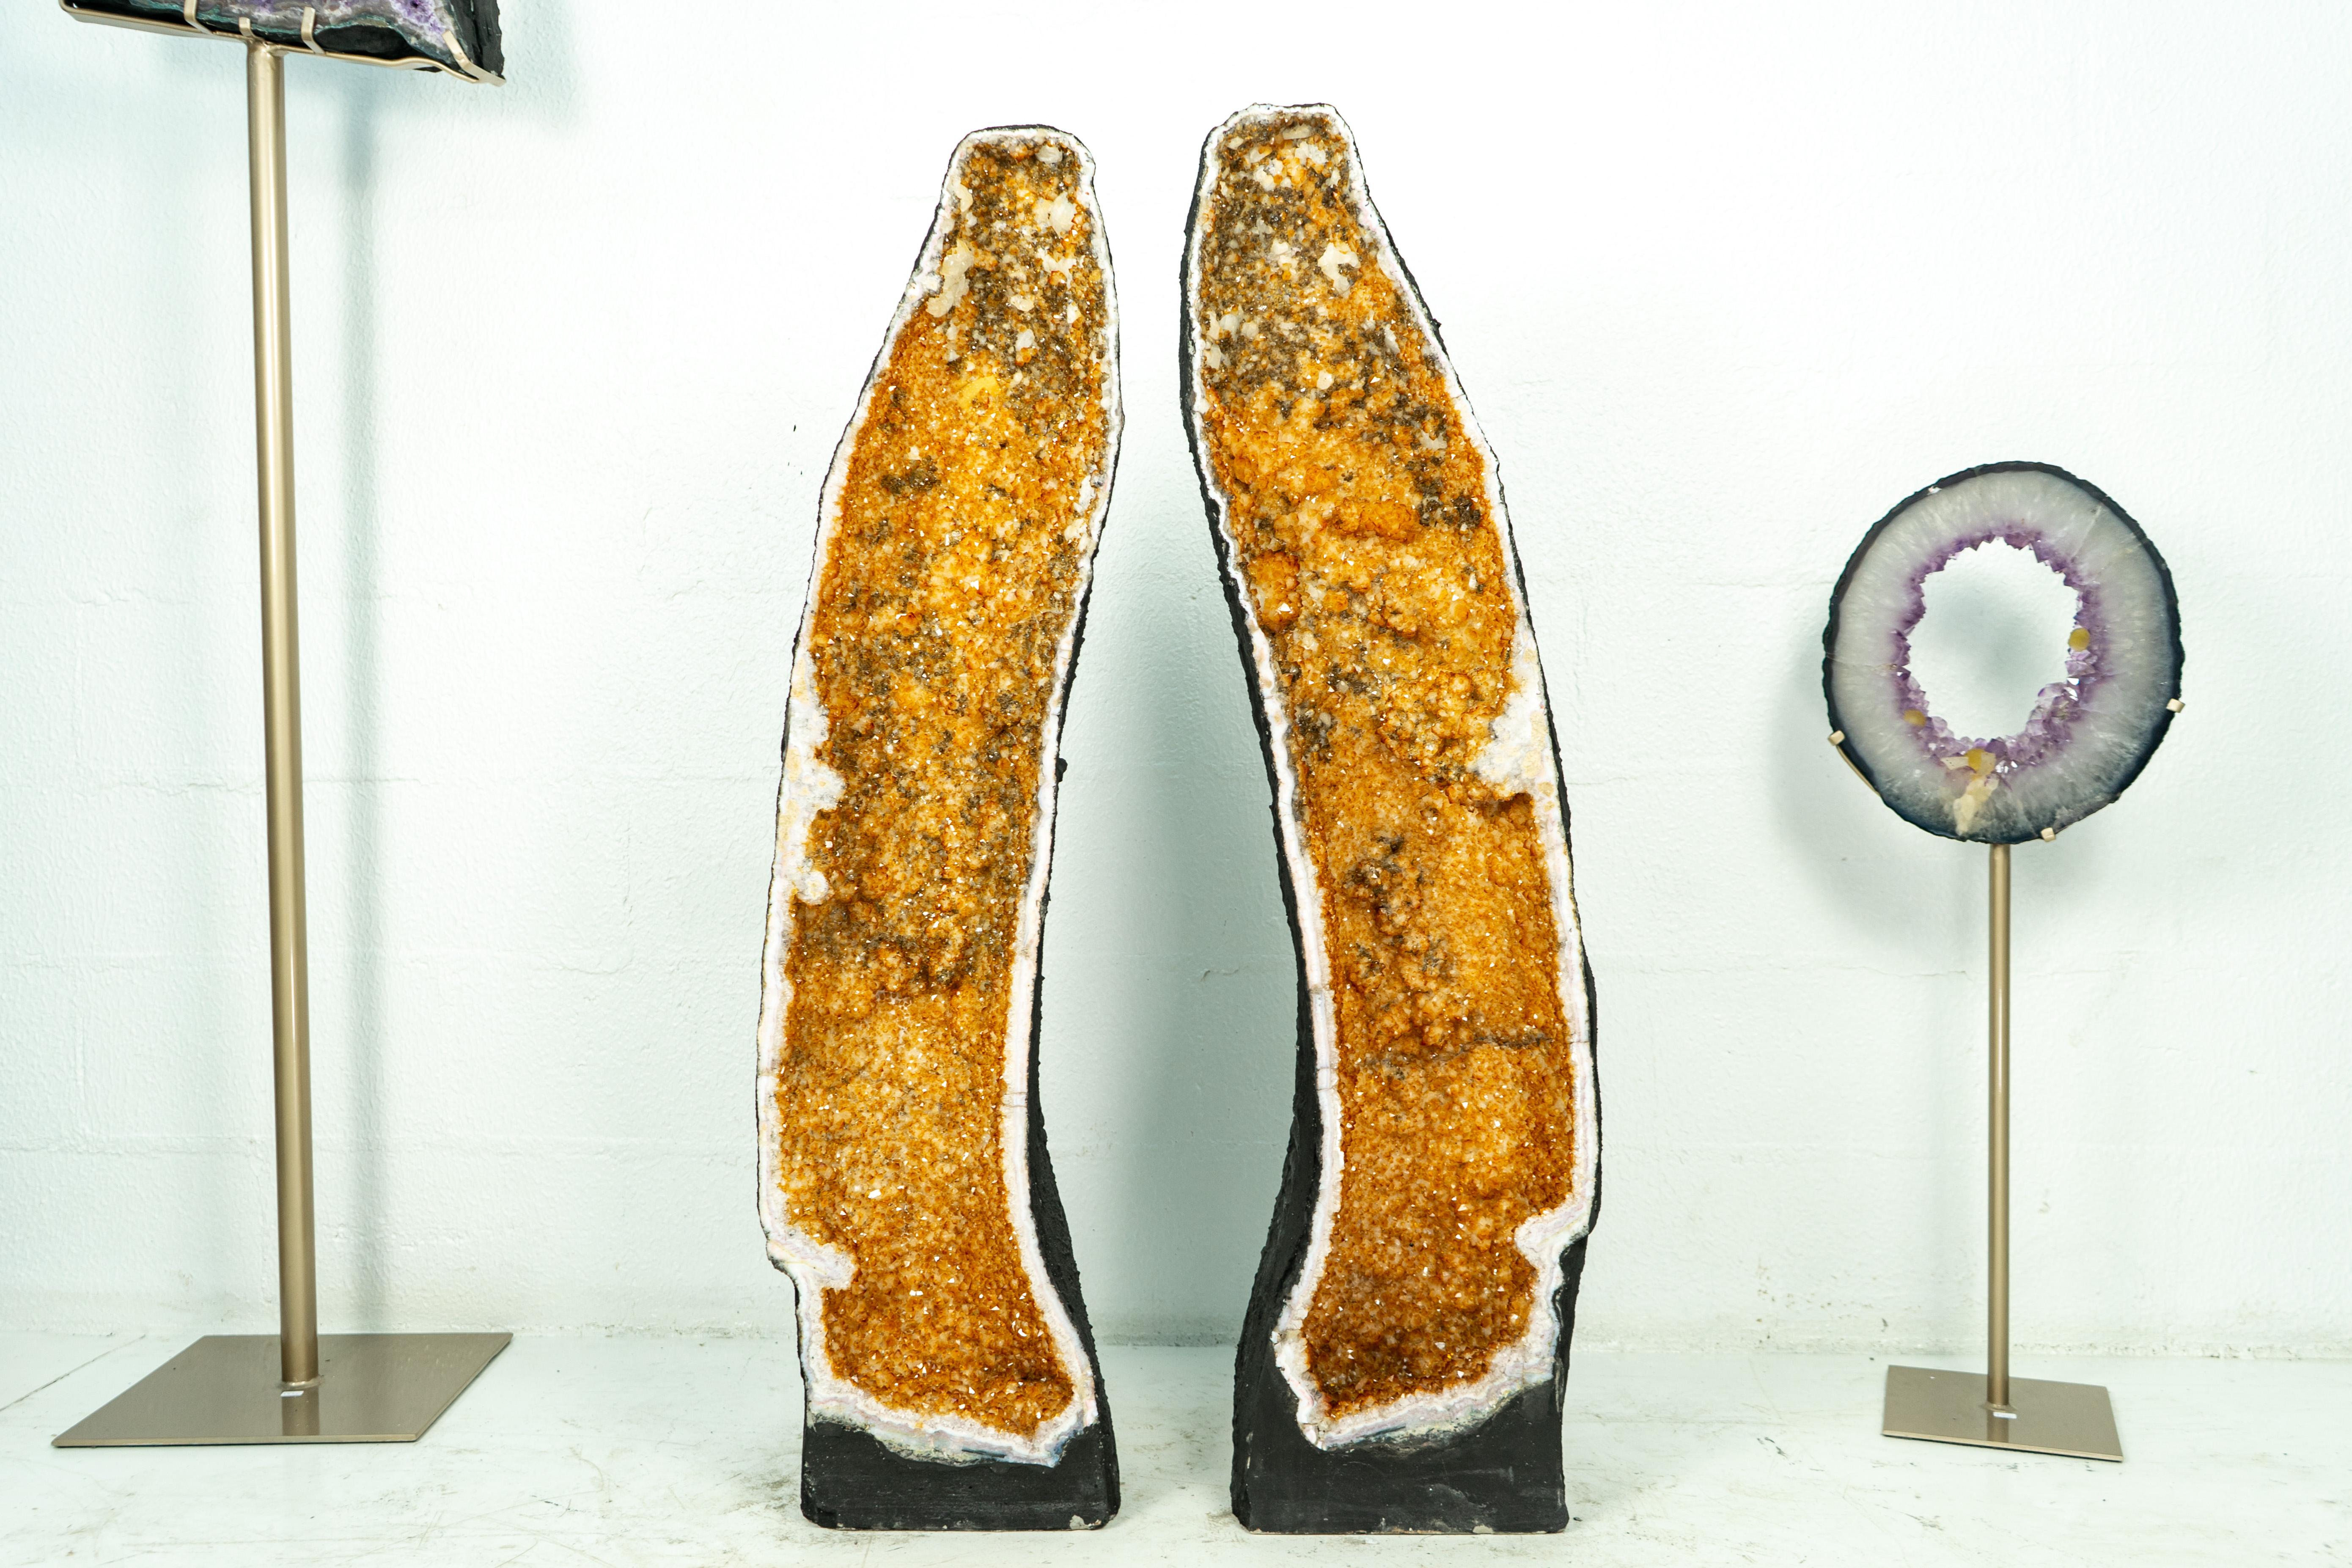 Standing at more than 45 Inches and bringing rare color, formation, and inclusions, this pair of X-Tall and Large Citrine Cathedrals is a once-in-a-lifetime find and will be an amazing addition to your Crystal Collection or the main attraction to